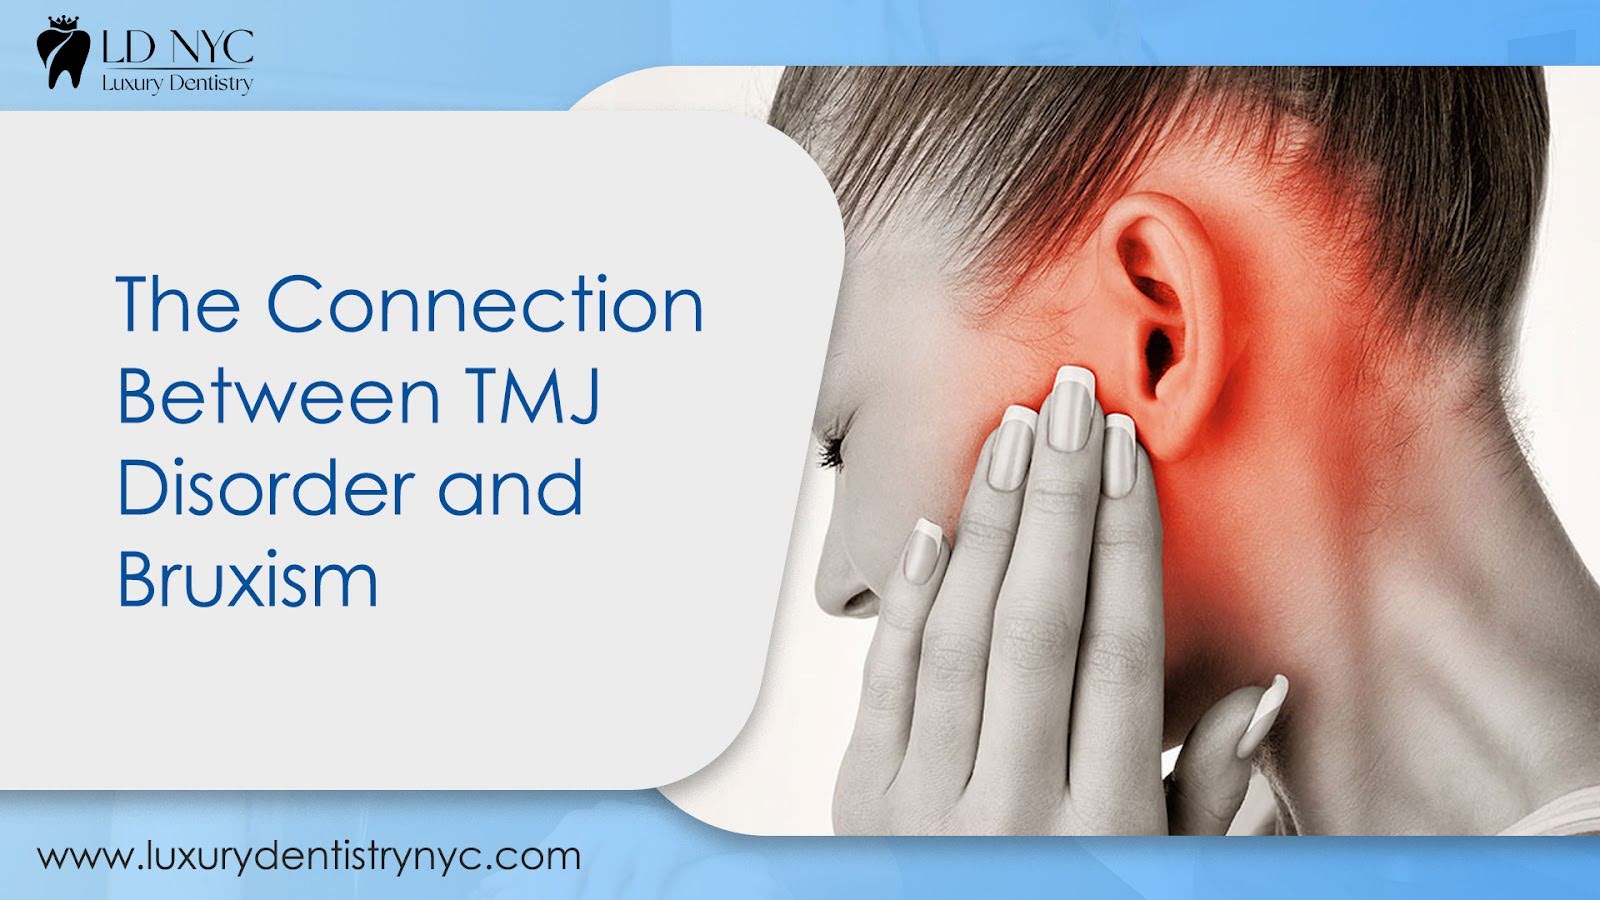 The Connection Between TMJ Disorder and Bruxism